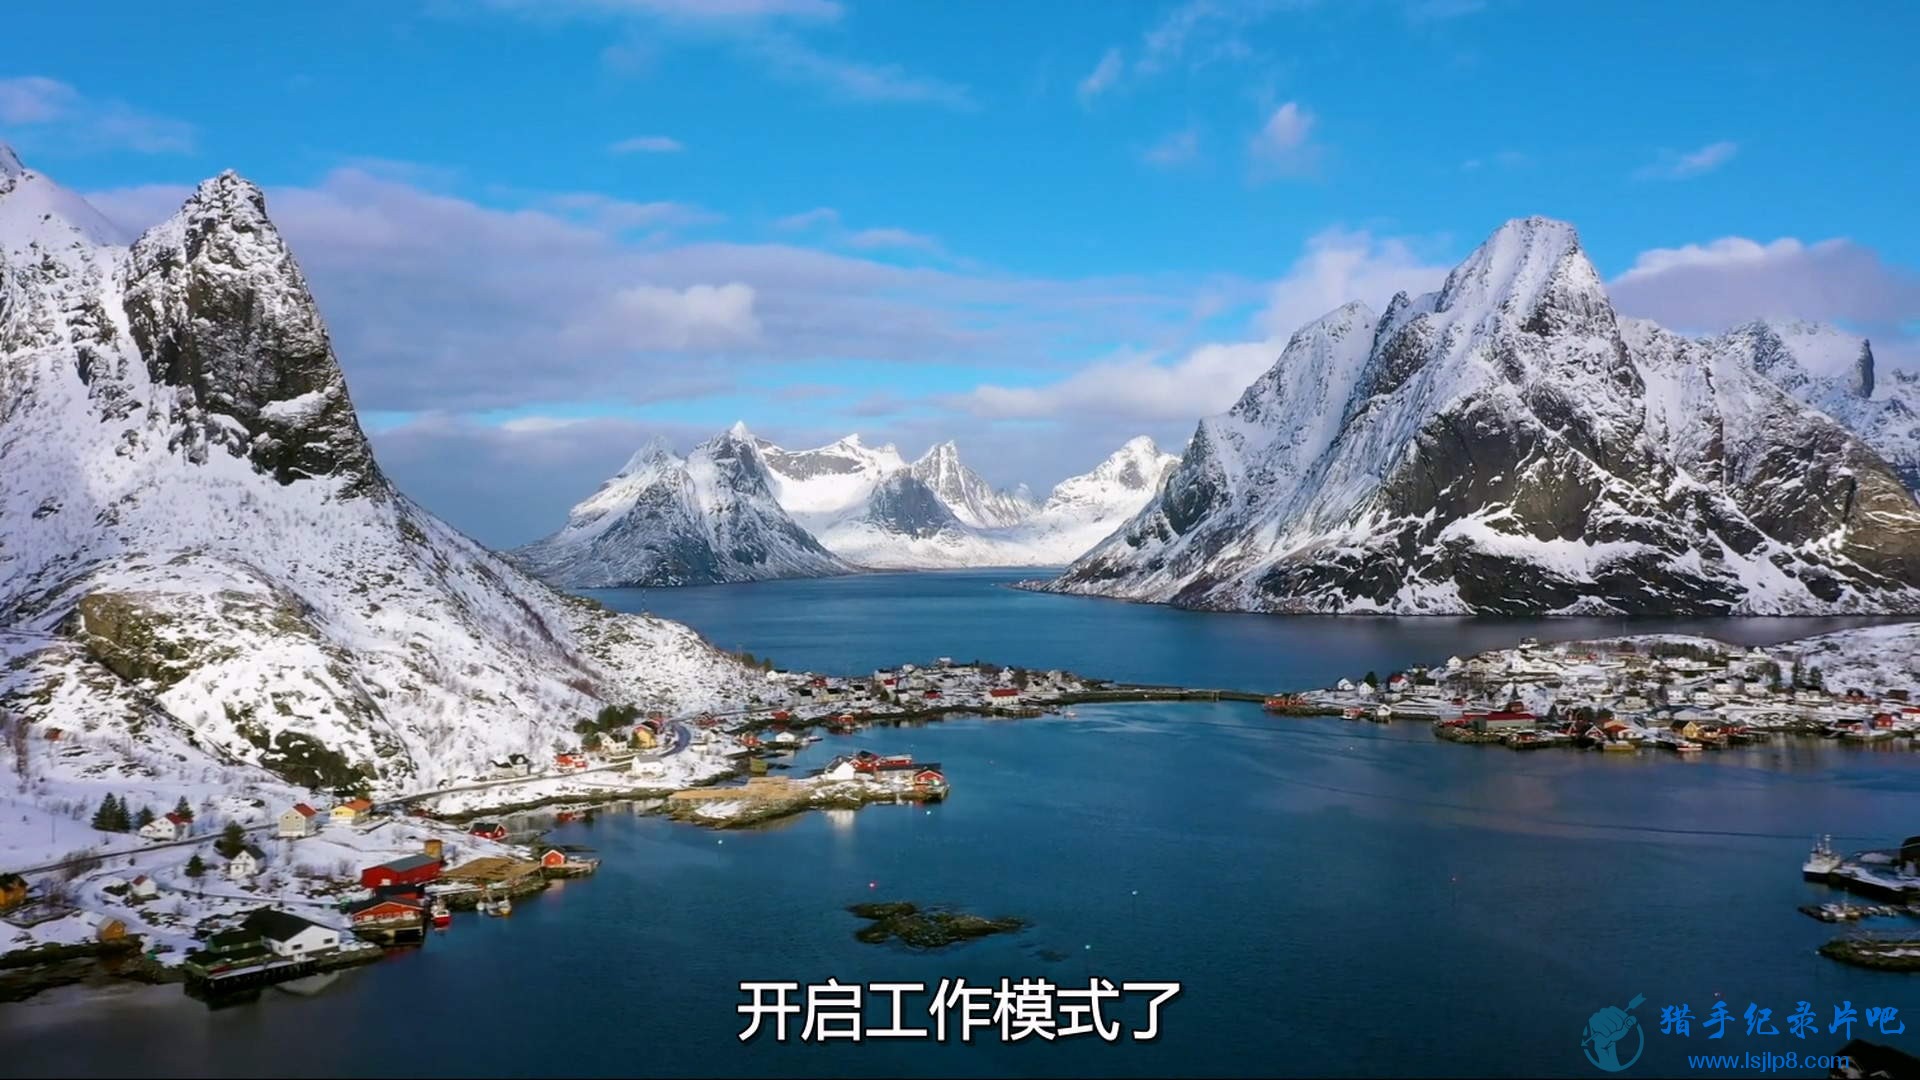 Europe.From.Above.S03E02.Norway.1080p.DSNP.WEB-DL.DD 5.1.H.264-NTb.2.jpg